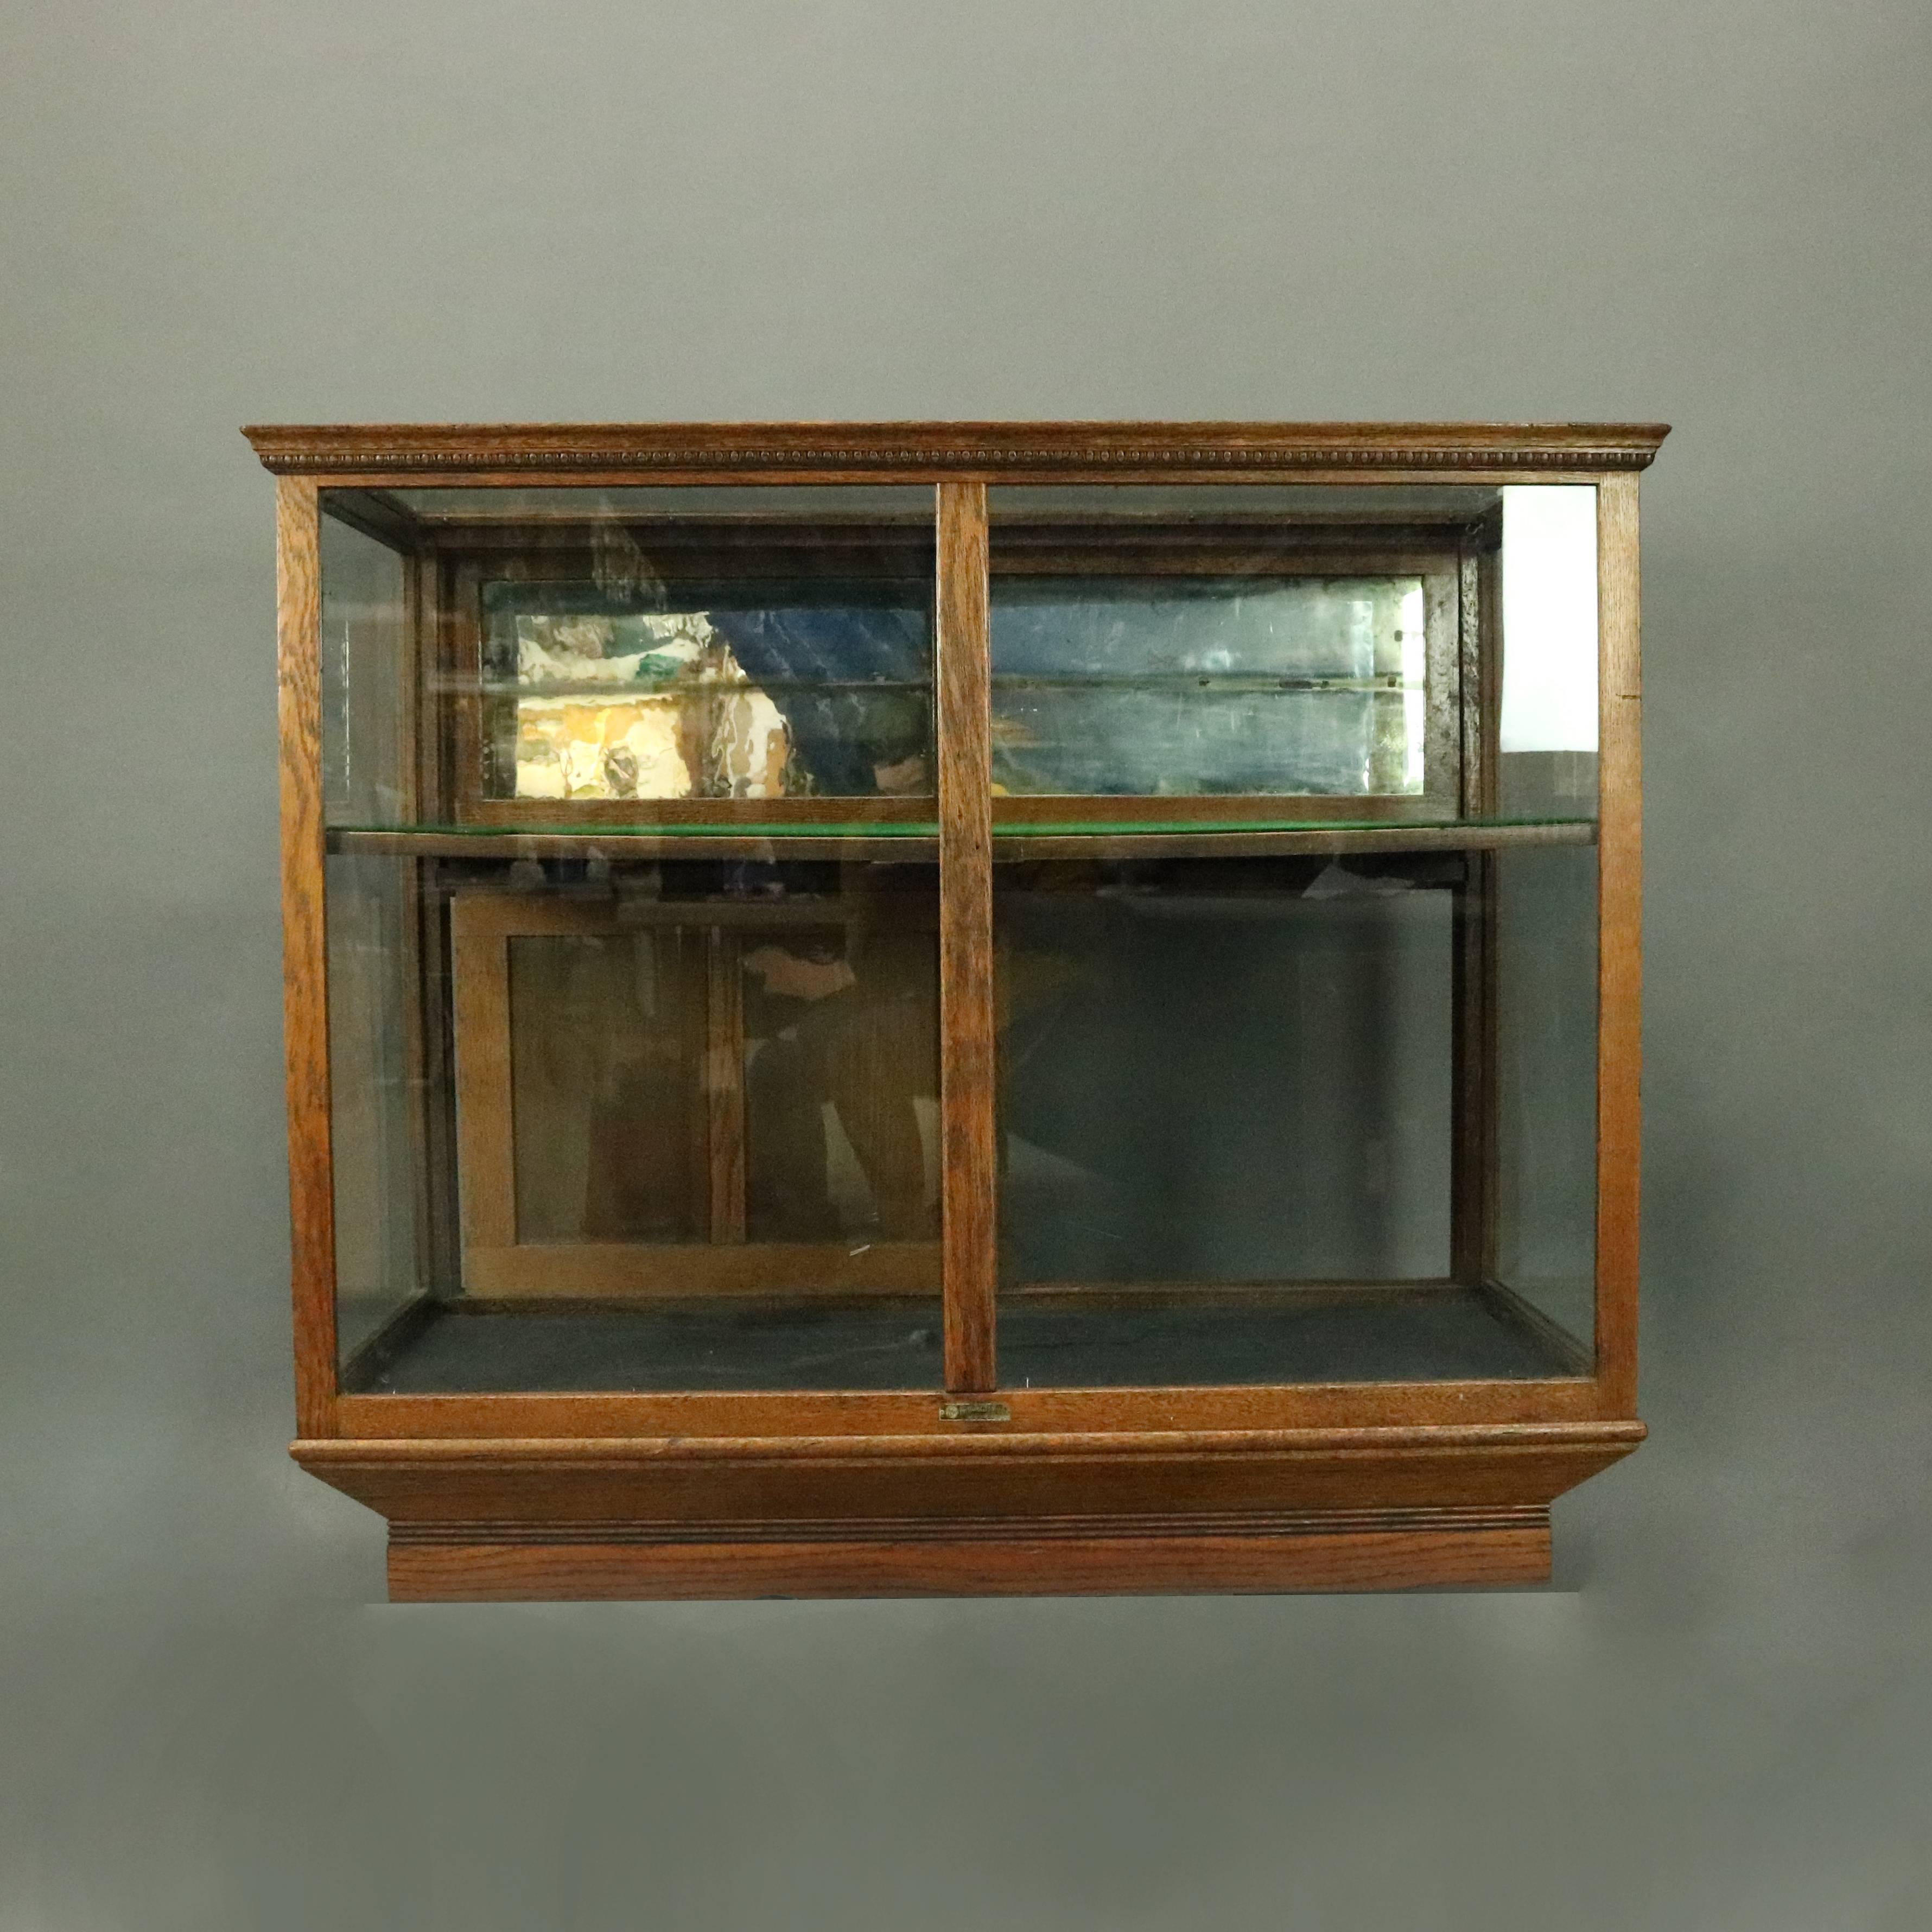 Antique country store mercantile display showcase by Waddell W. W. Works, Greenfield, Ohio, features oak construction with egg and dart trim, two sets of sliding doors reveal shelved mirror-back interior, circa 1890.

Measures: 38" H x